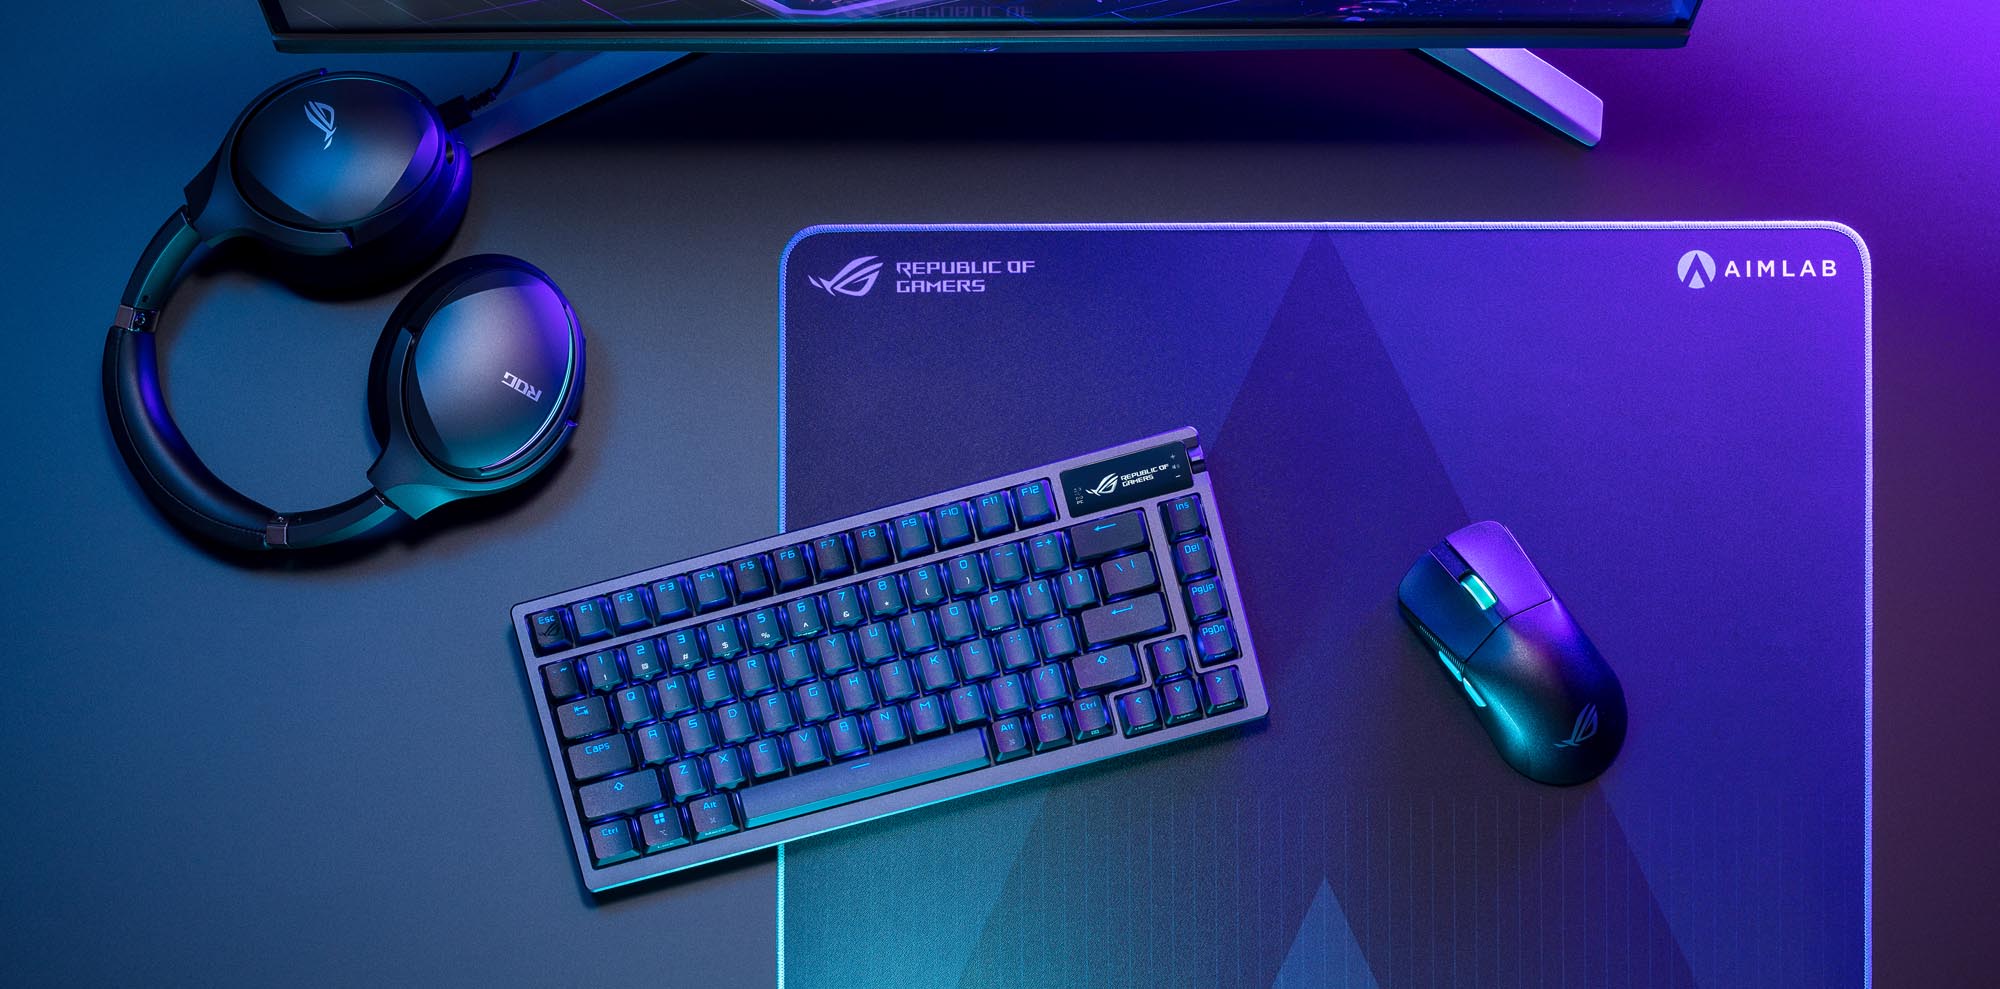 The ROG Azoth keyboard on a desk surrounded by a mouse, headset, and monitor with purple light in the background.